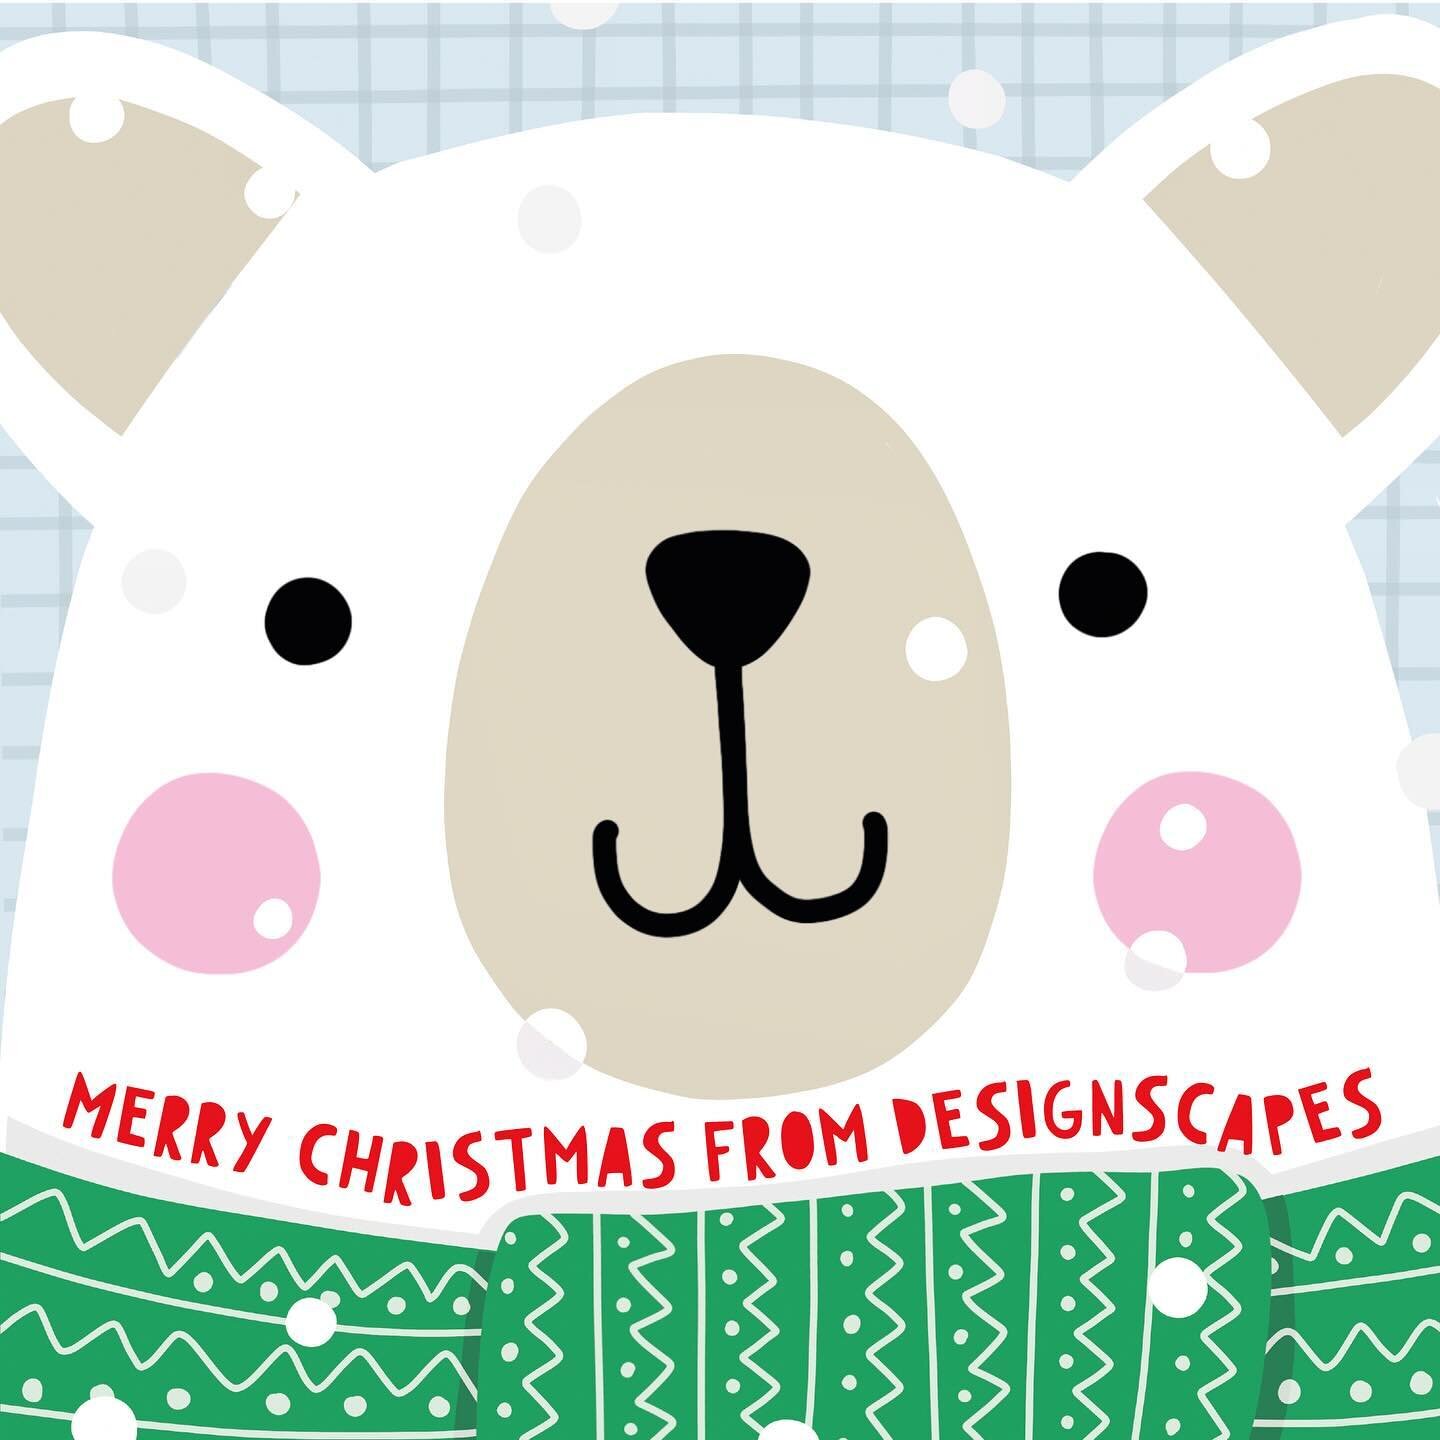 Wishing everyone a very Merry Christmas and a happy and healthy new year!  We are so appreciative of all of our partnerships with our artists, our customers and our factories. - the Designscapes team!